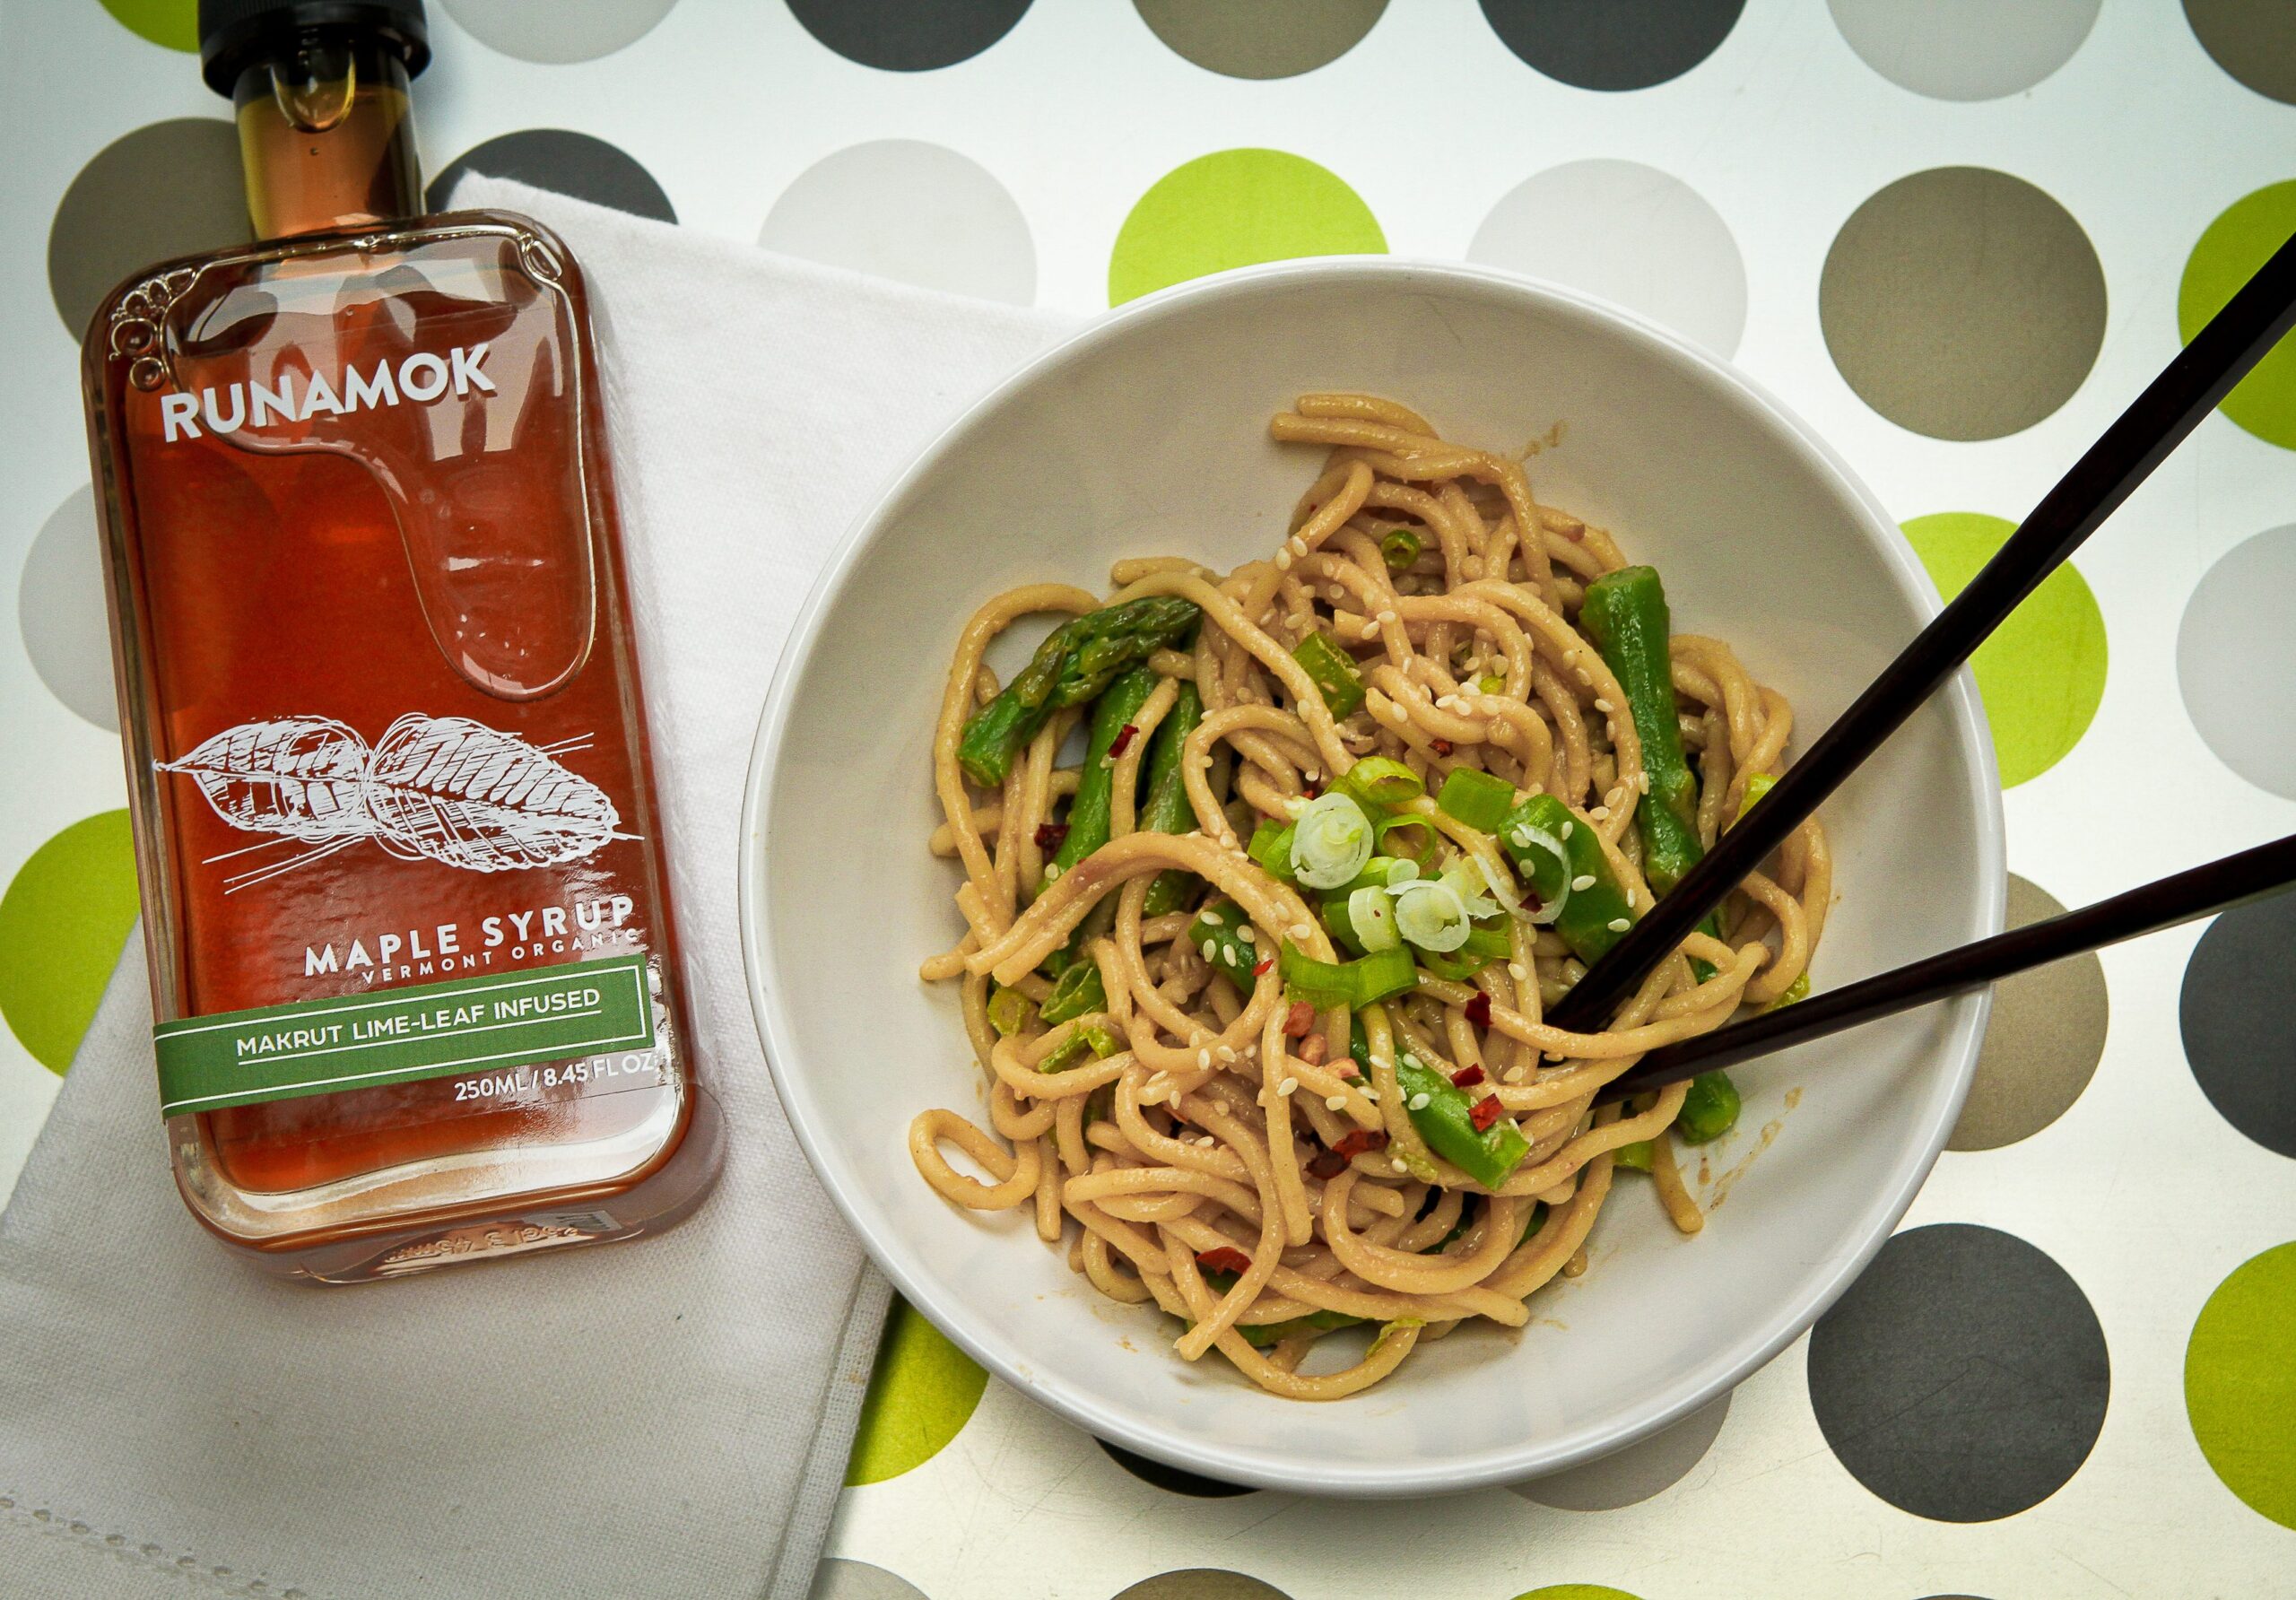 Maple syrup sesame noodles by Runamok Maple